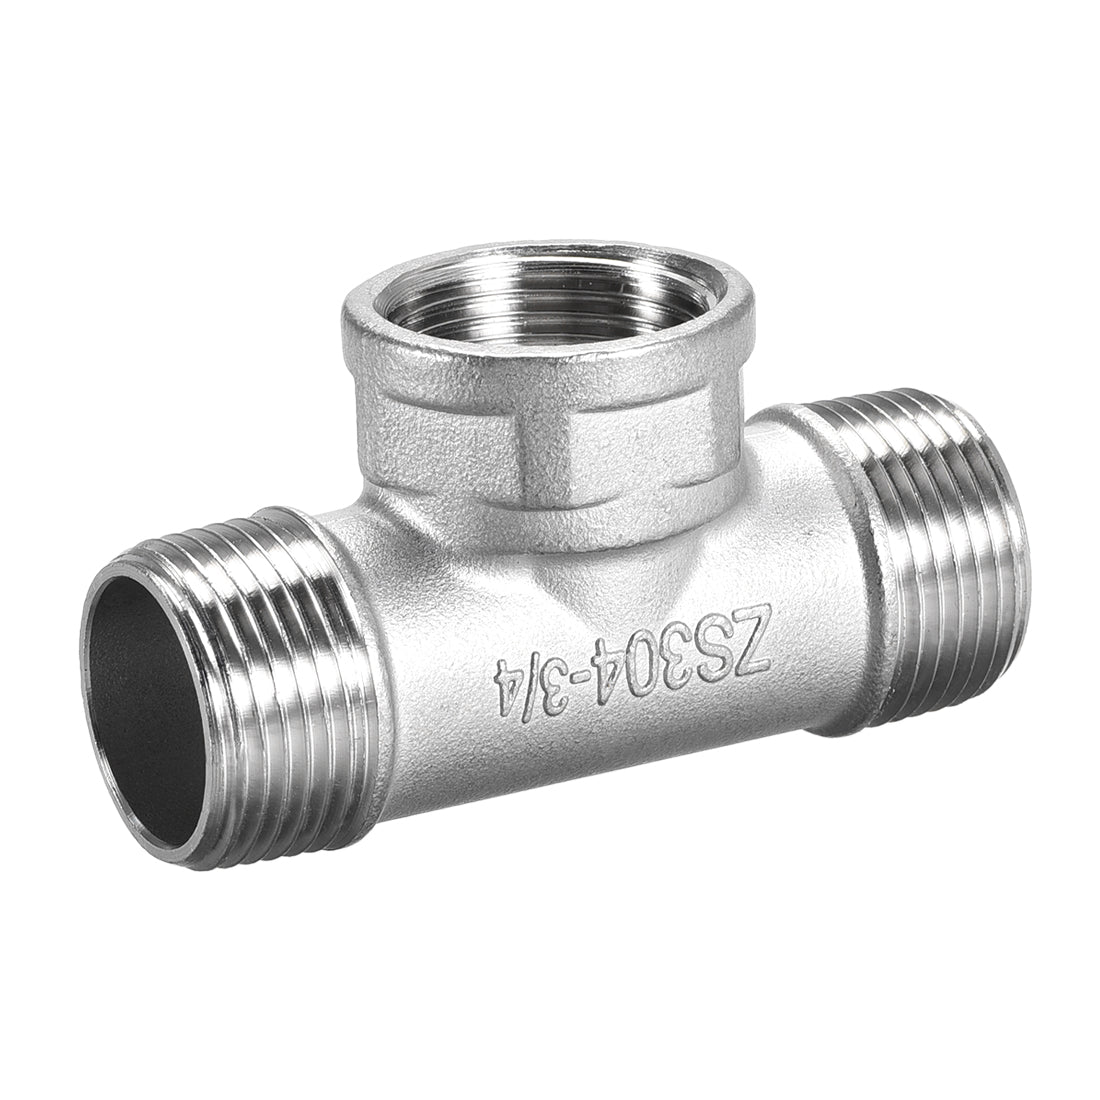 uxcell Uxcell Stainless Steel 304 Cast  Pipe Fitting 3/4 BSPT Male x 3/4 BSPT Female x 3/4 BSPT Male Tee Shaped Connector Coupler